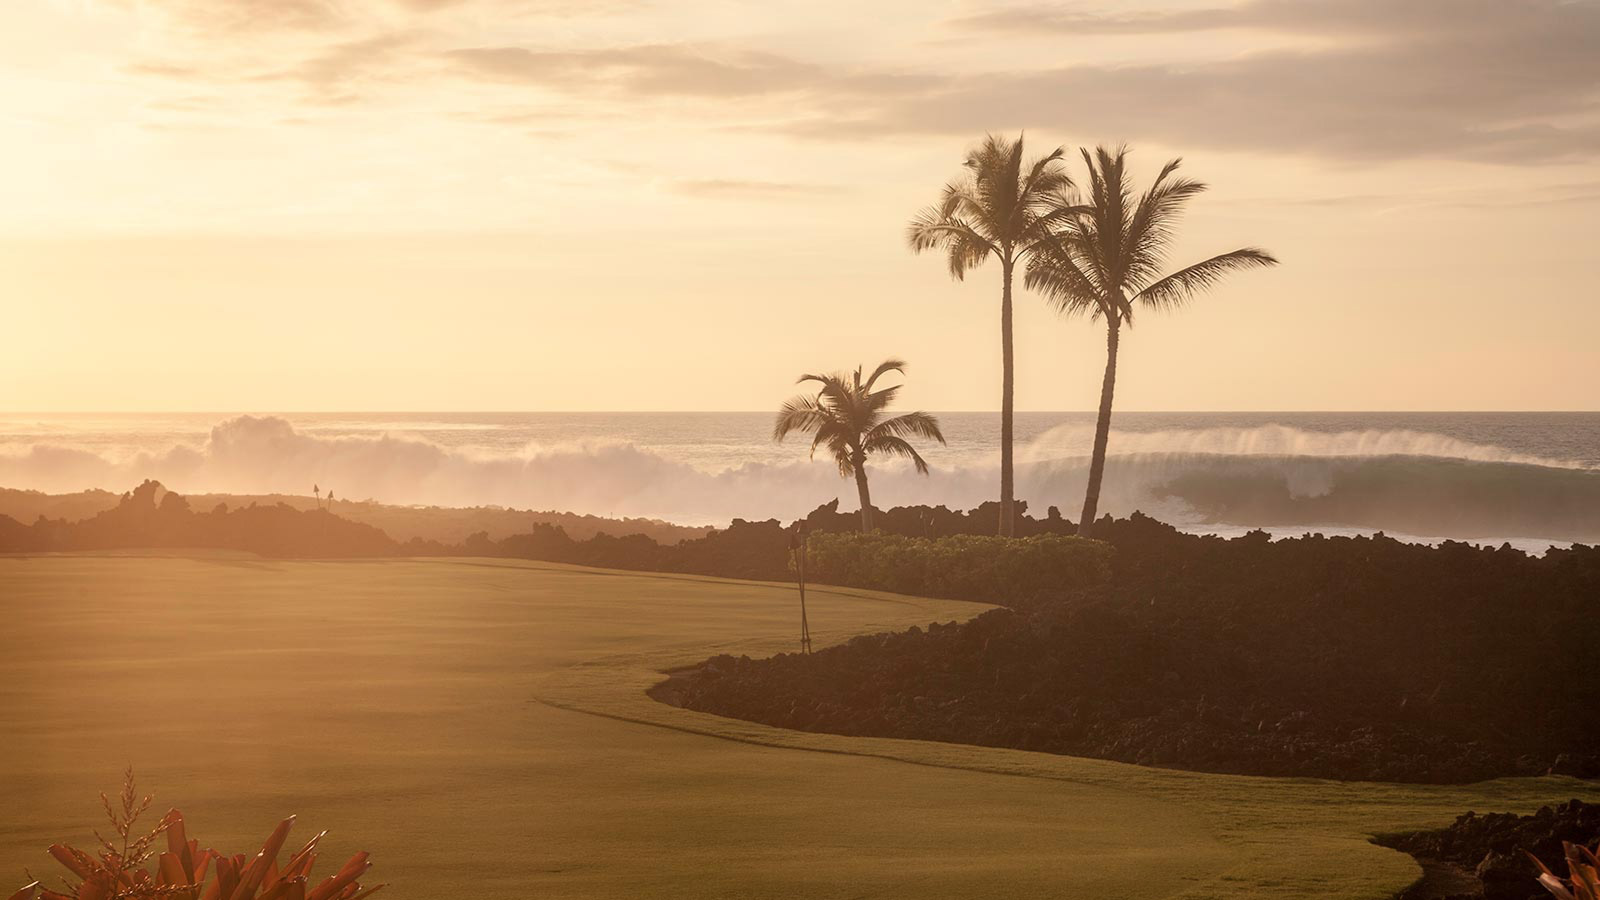 Big island Hawaii has the perfect climate for outdoor sports